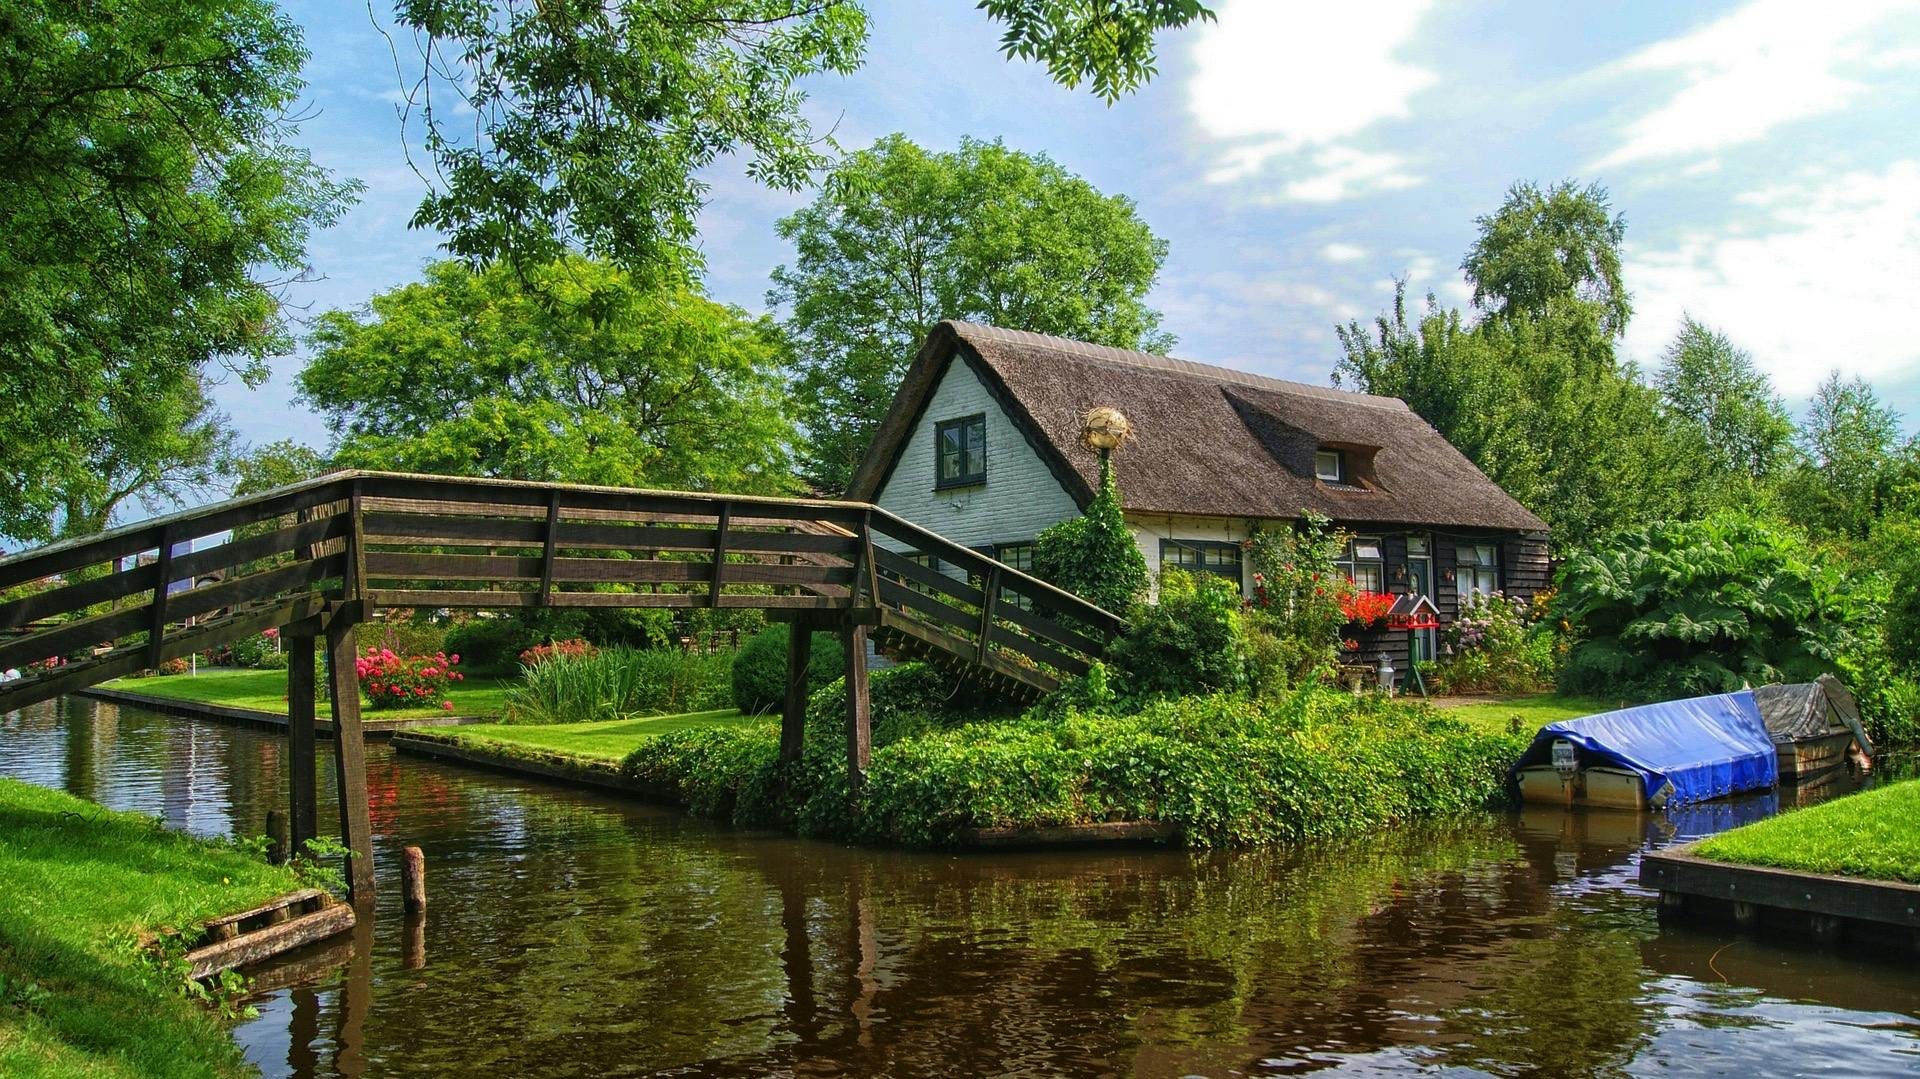 Luxury sightseeing tour to Giethoorn with private transportation from Amsterdam Musement